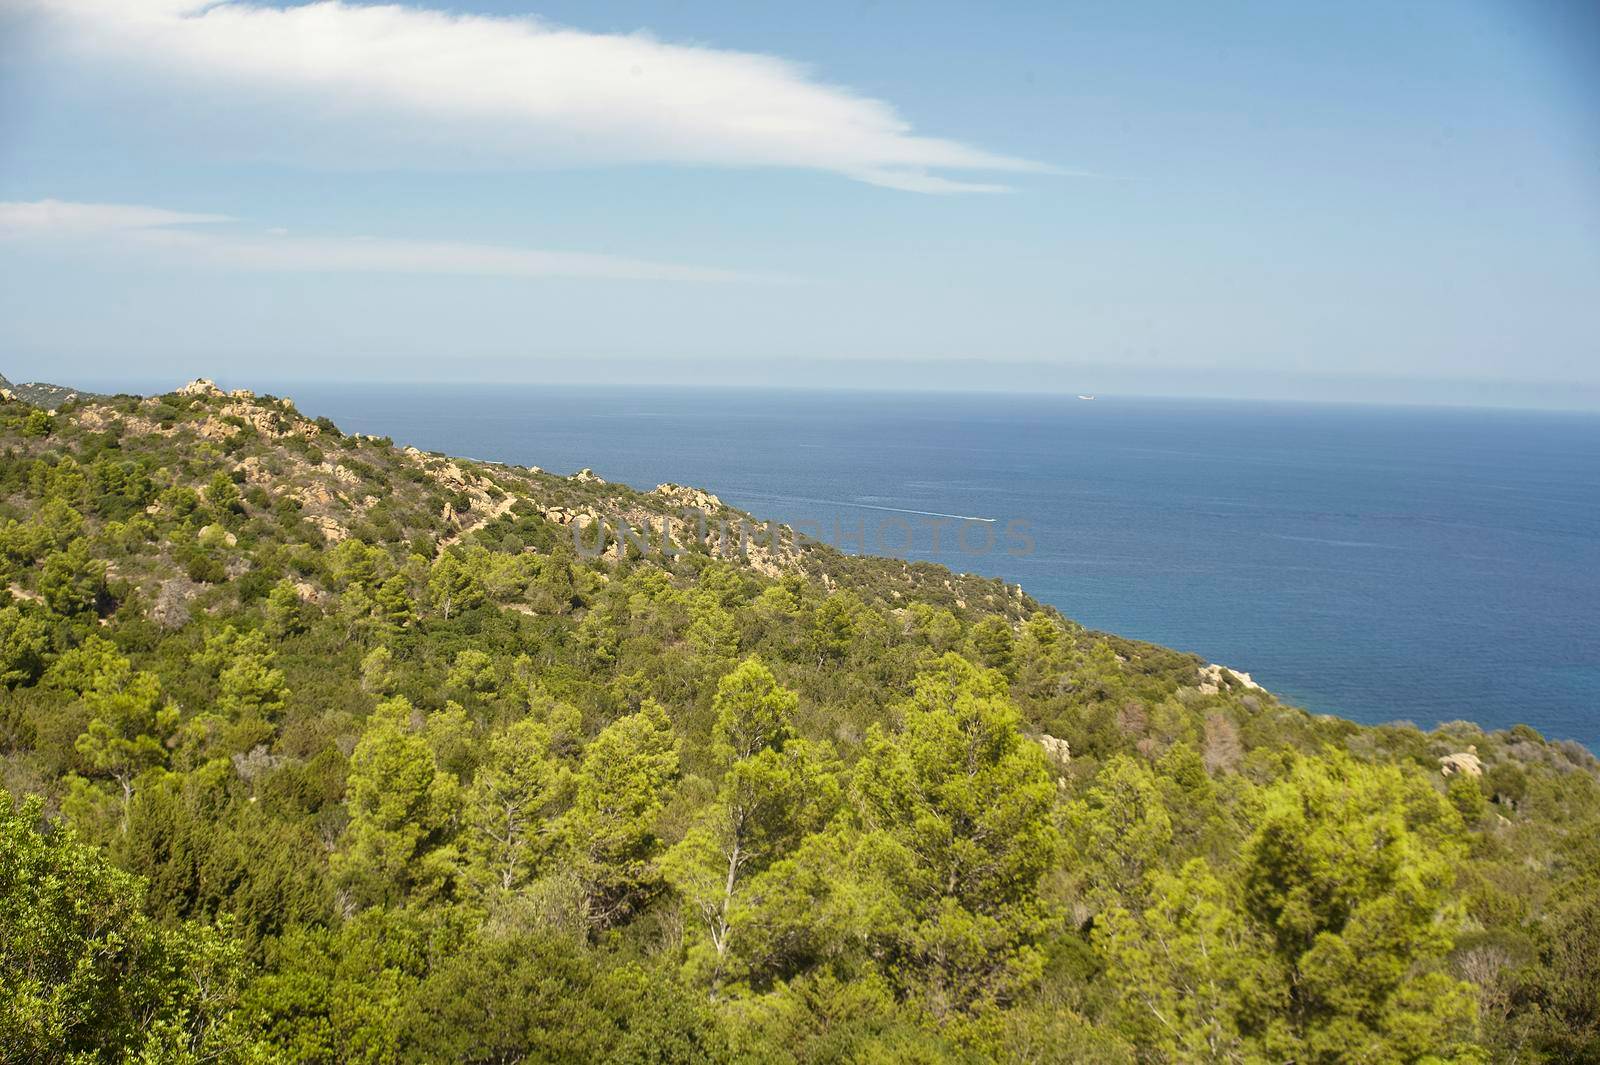 Wonderful lanscape with a portion of the south coast of Sardinia with the sea in front of you on a beautiful summer day.